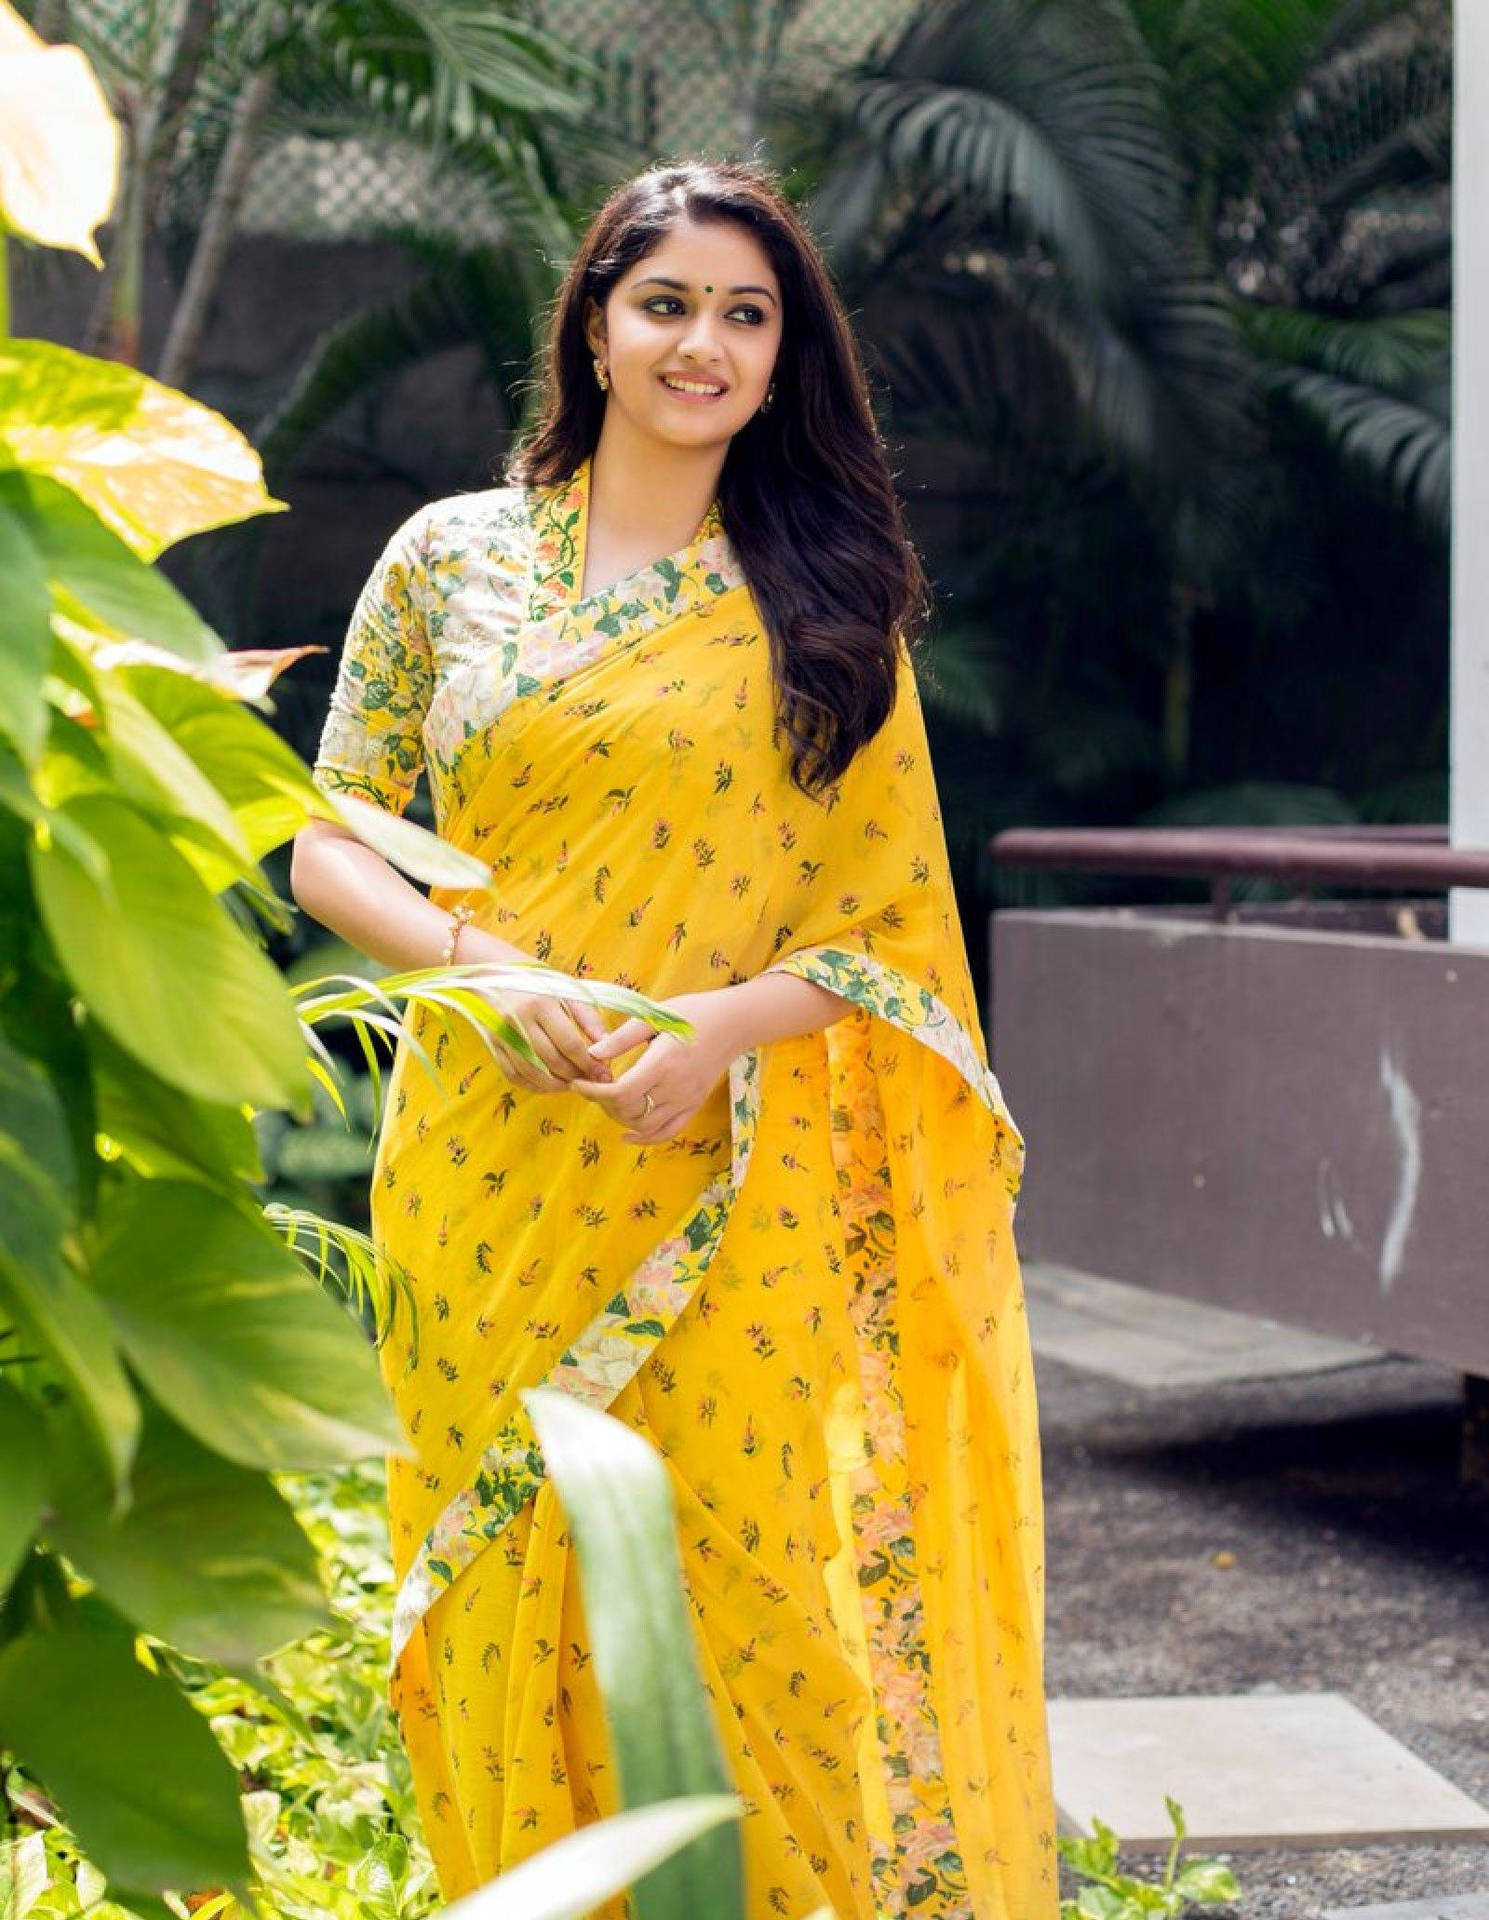 Keerthi Suresh In Sari By A Plant Hd Background